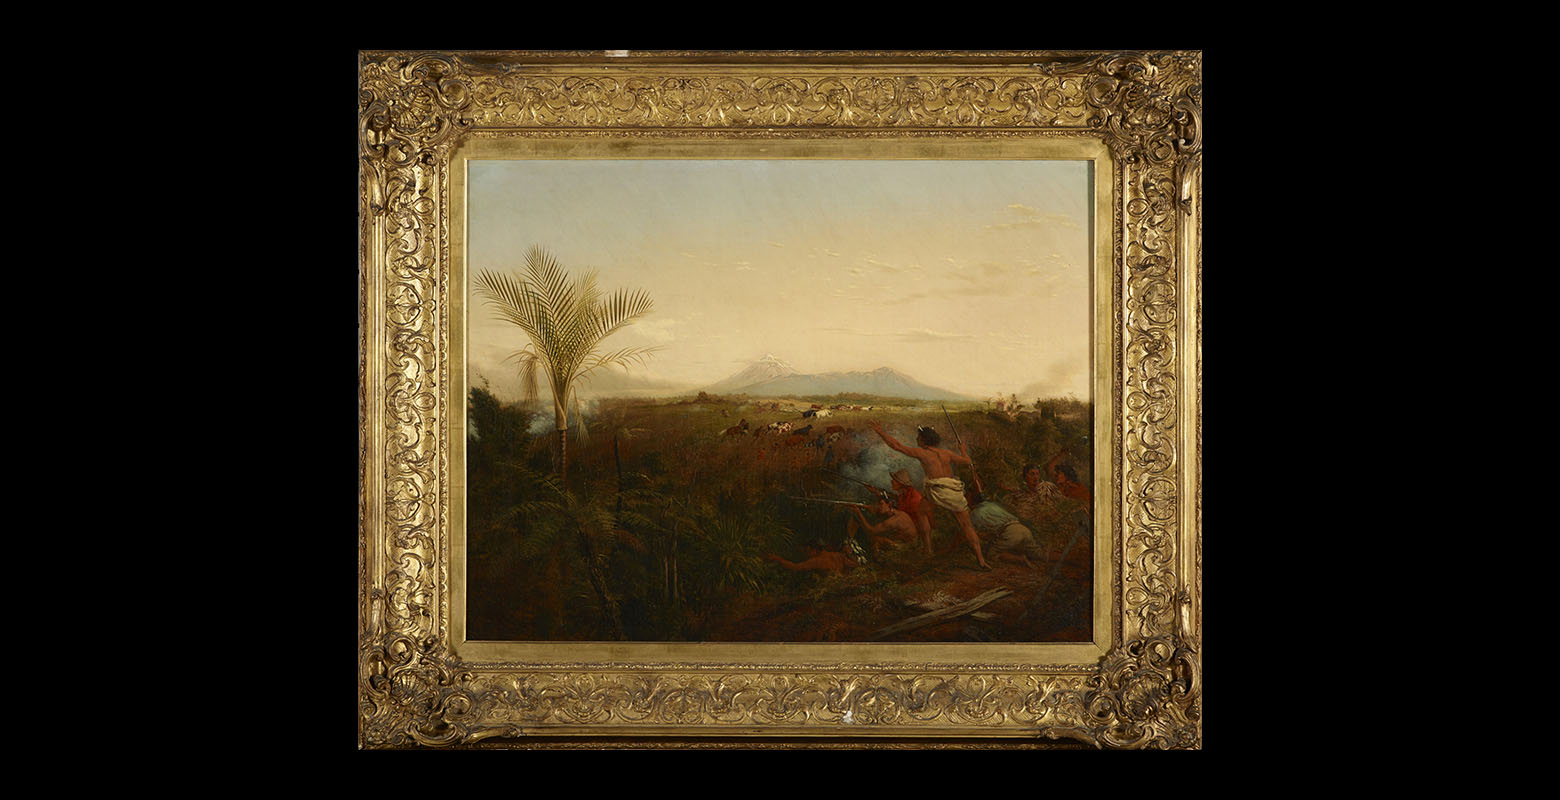 Painting of Mt Taranaki with Māori people in the foreground firing their weapons at cattle in the distance